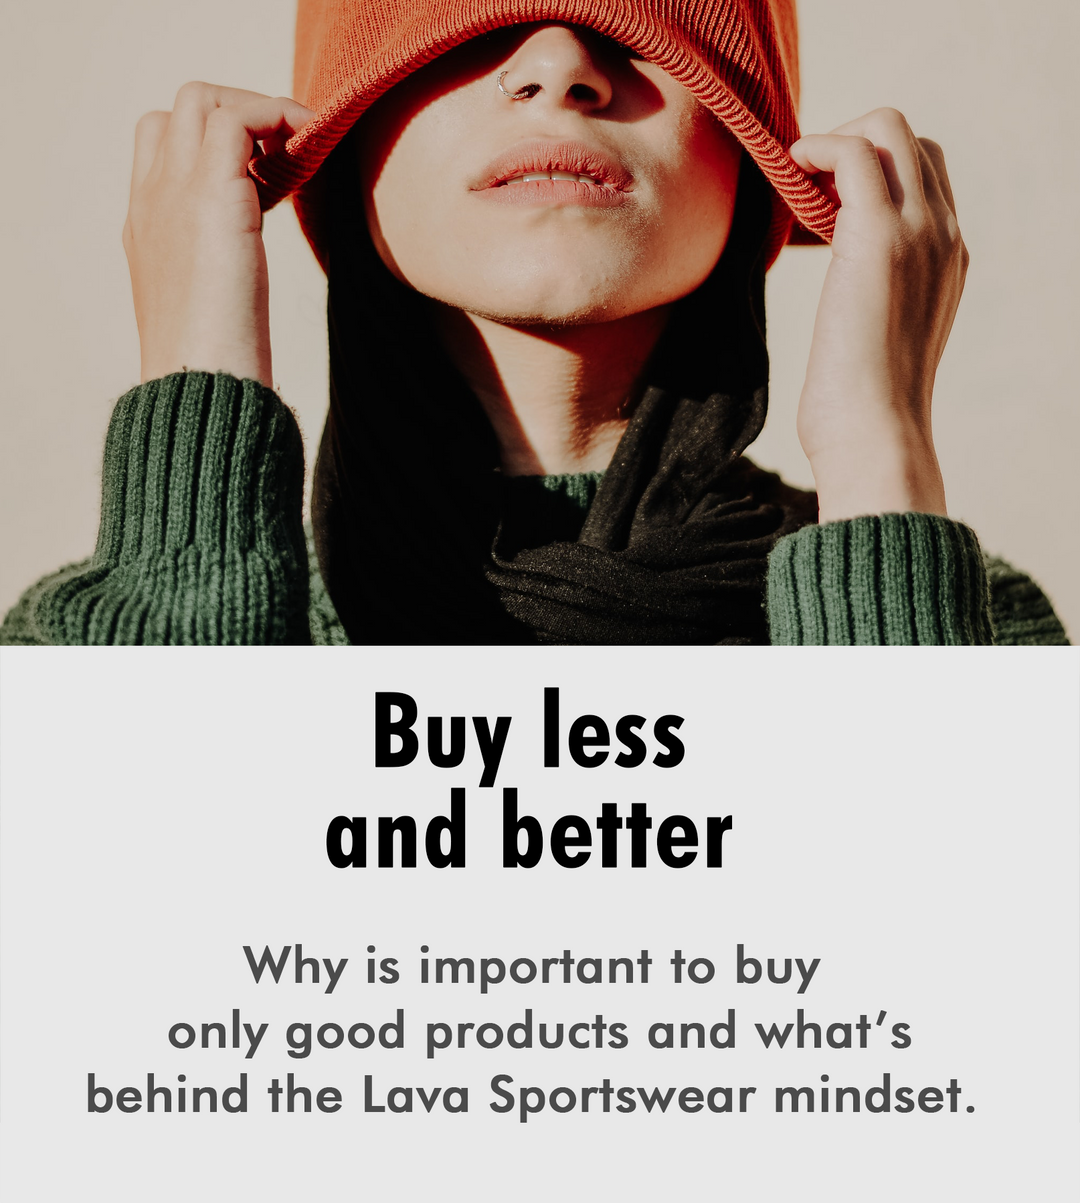 Buy less and better